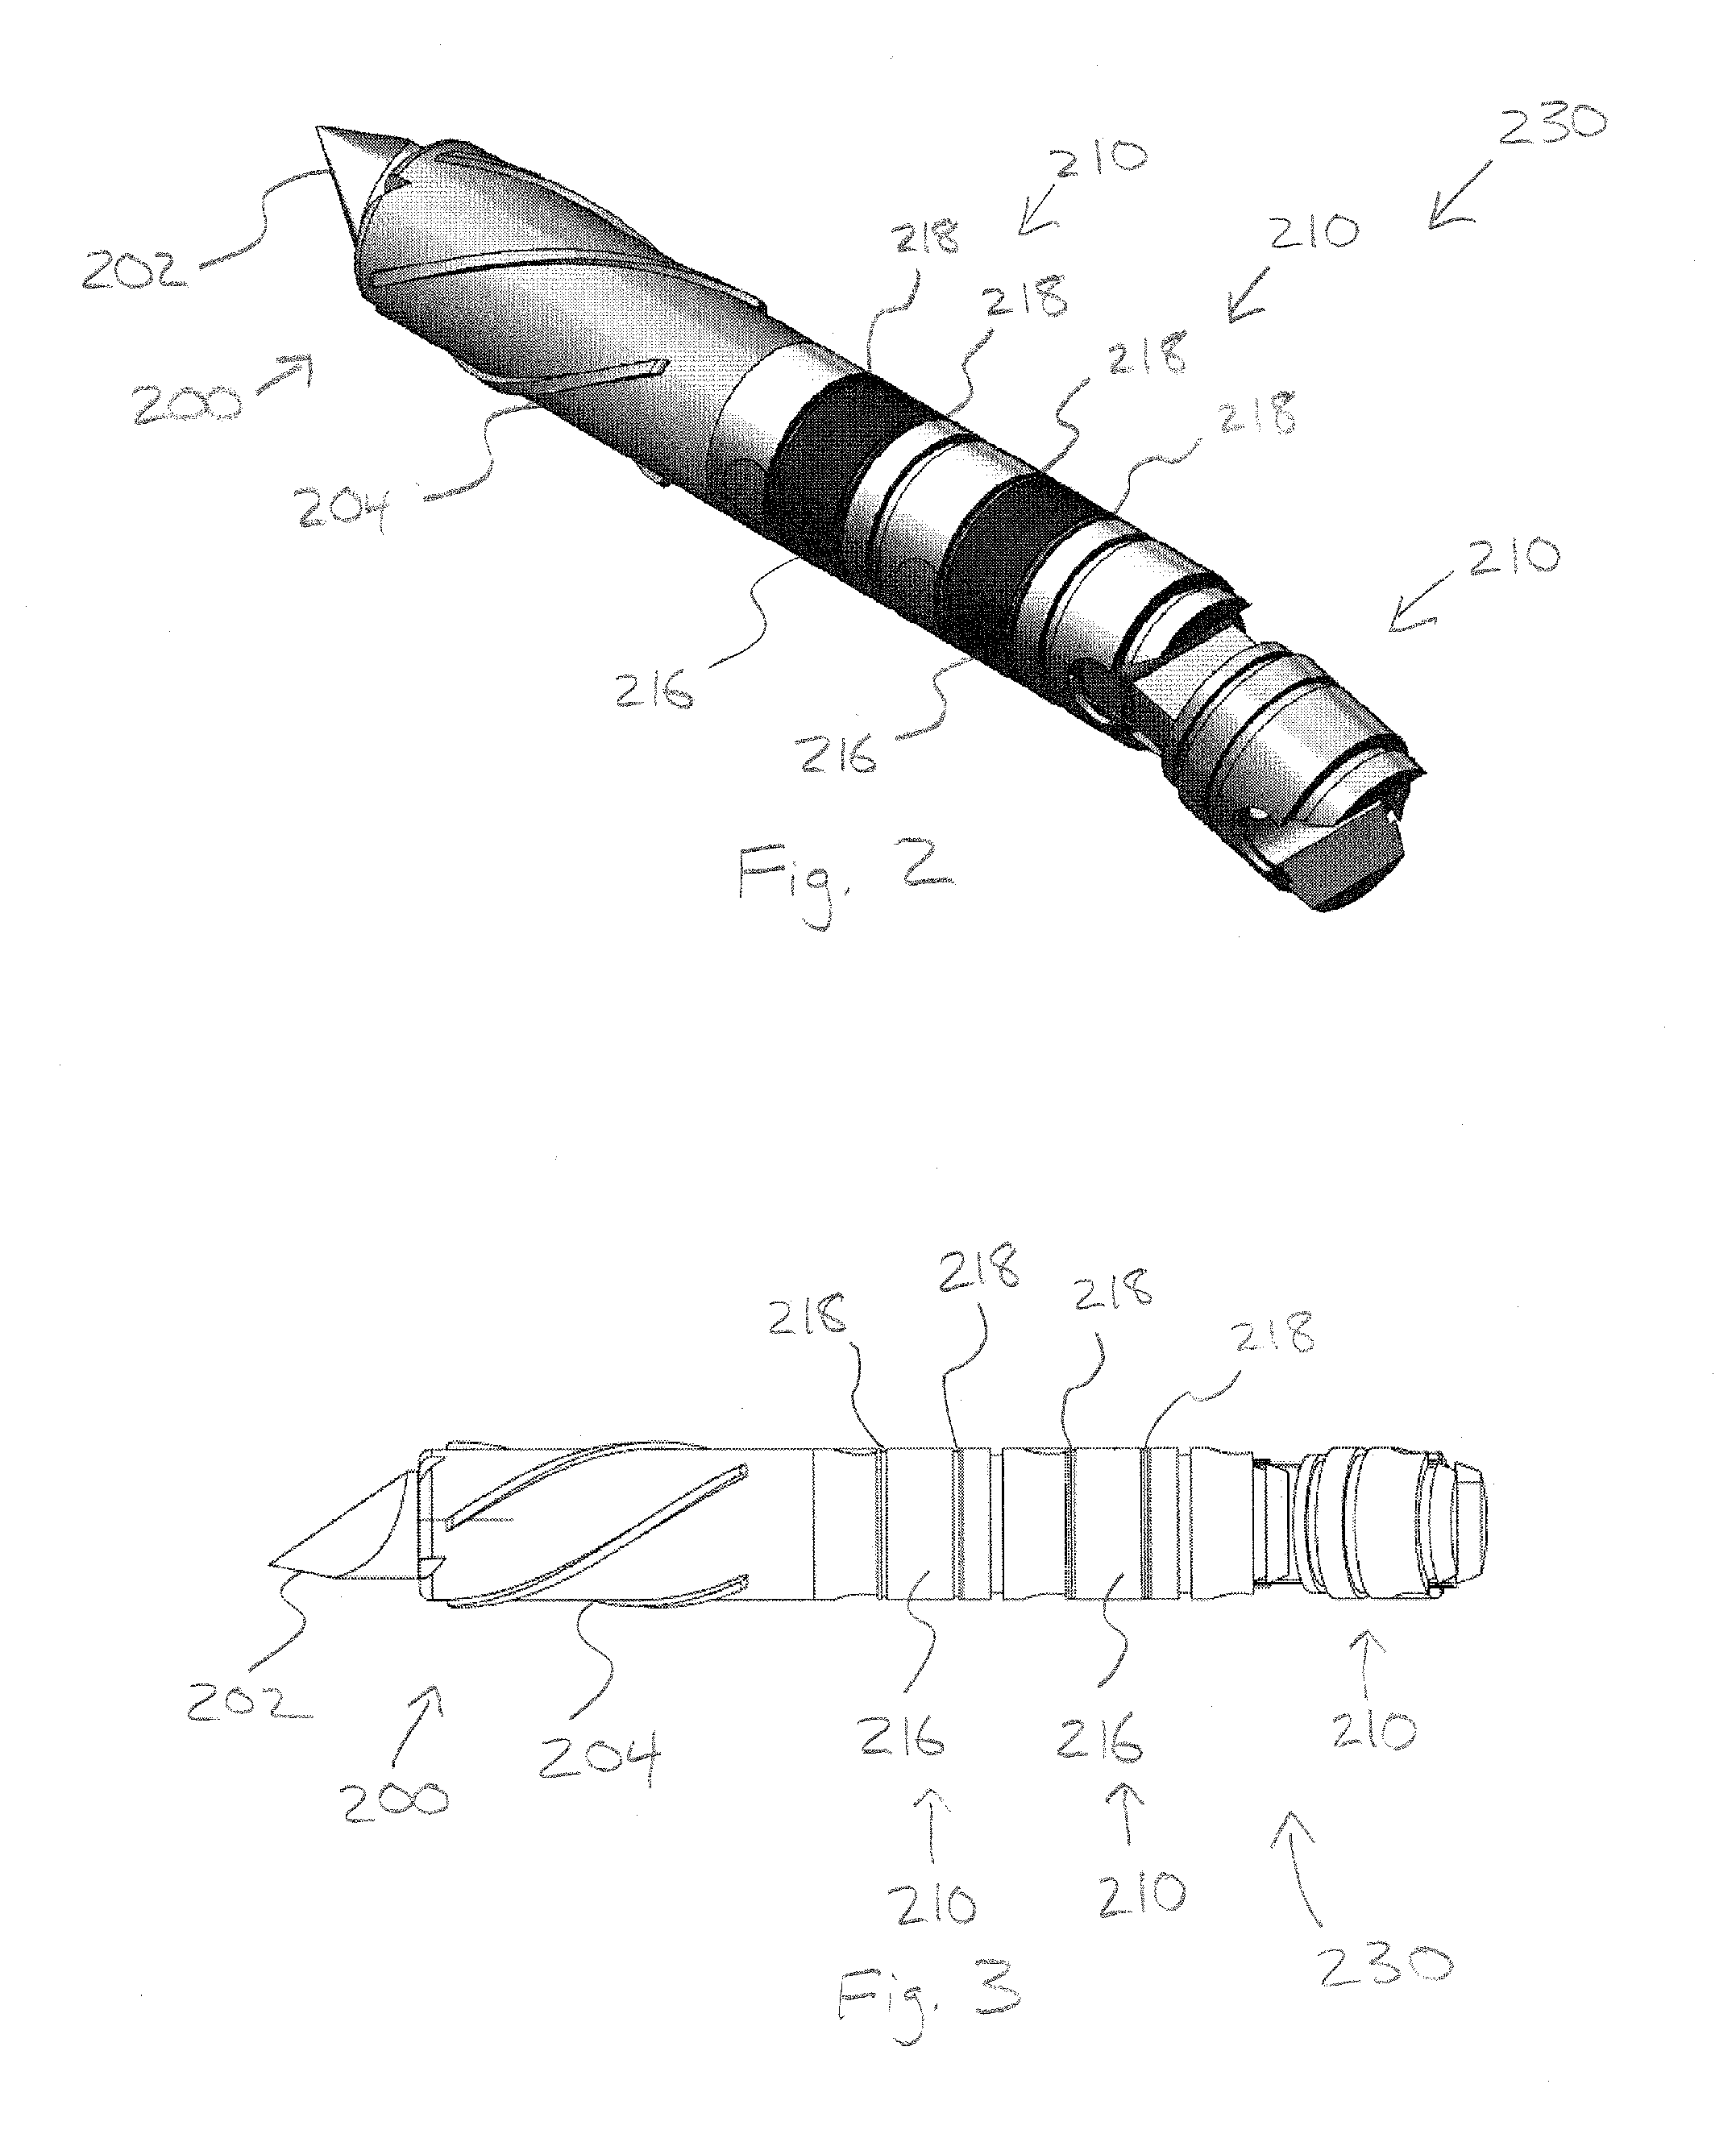 Method for Forming a Geothermal Well